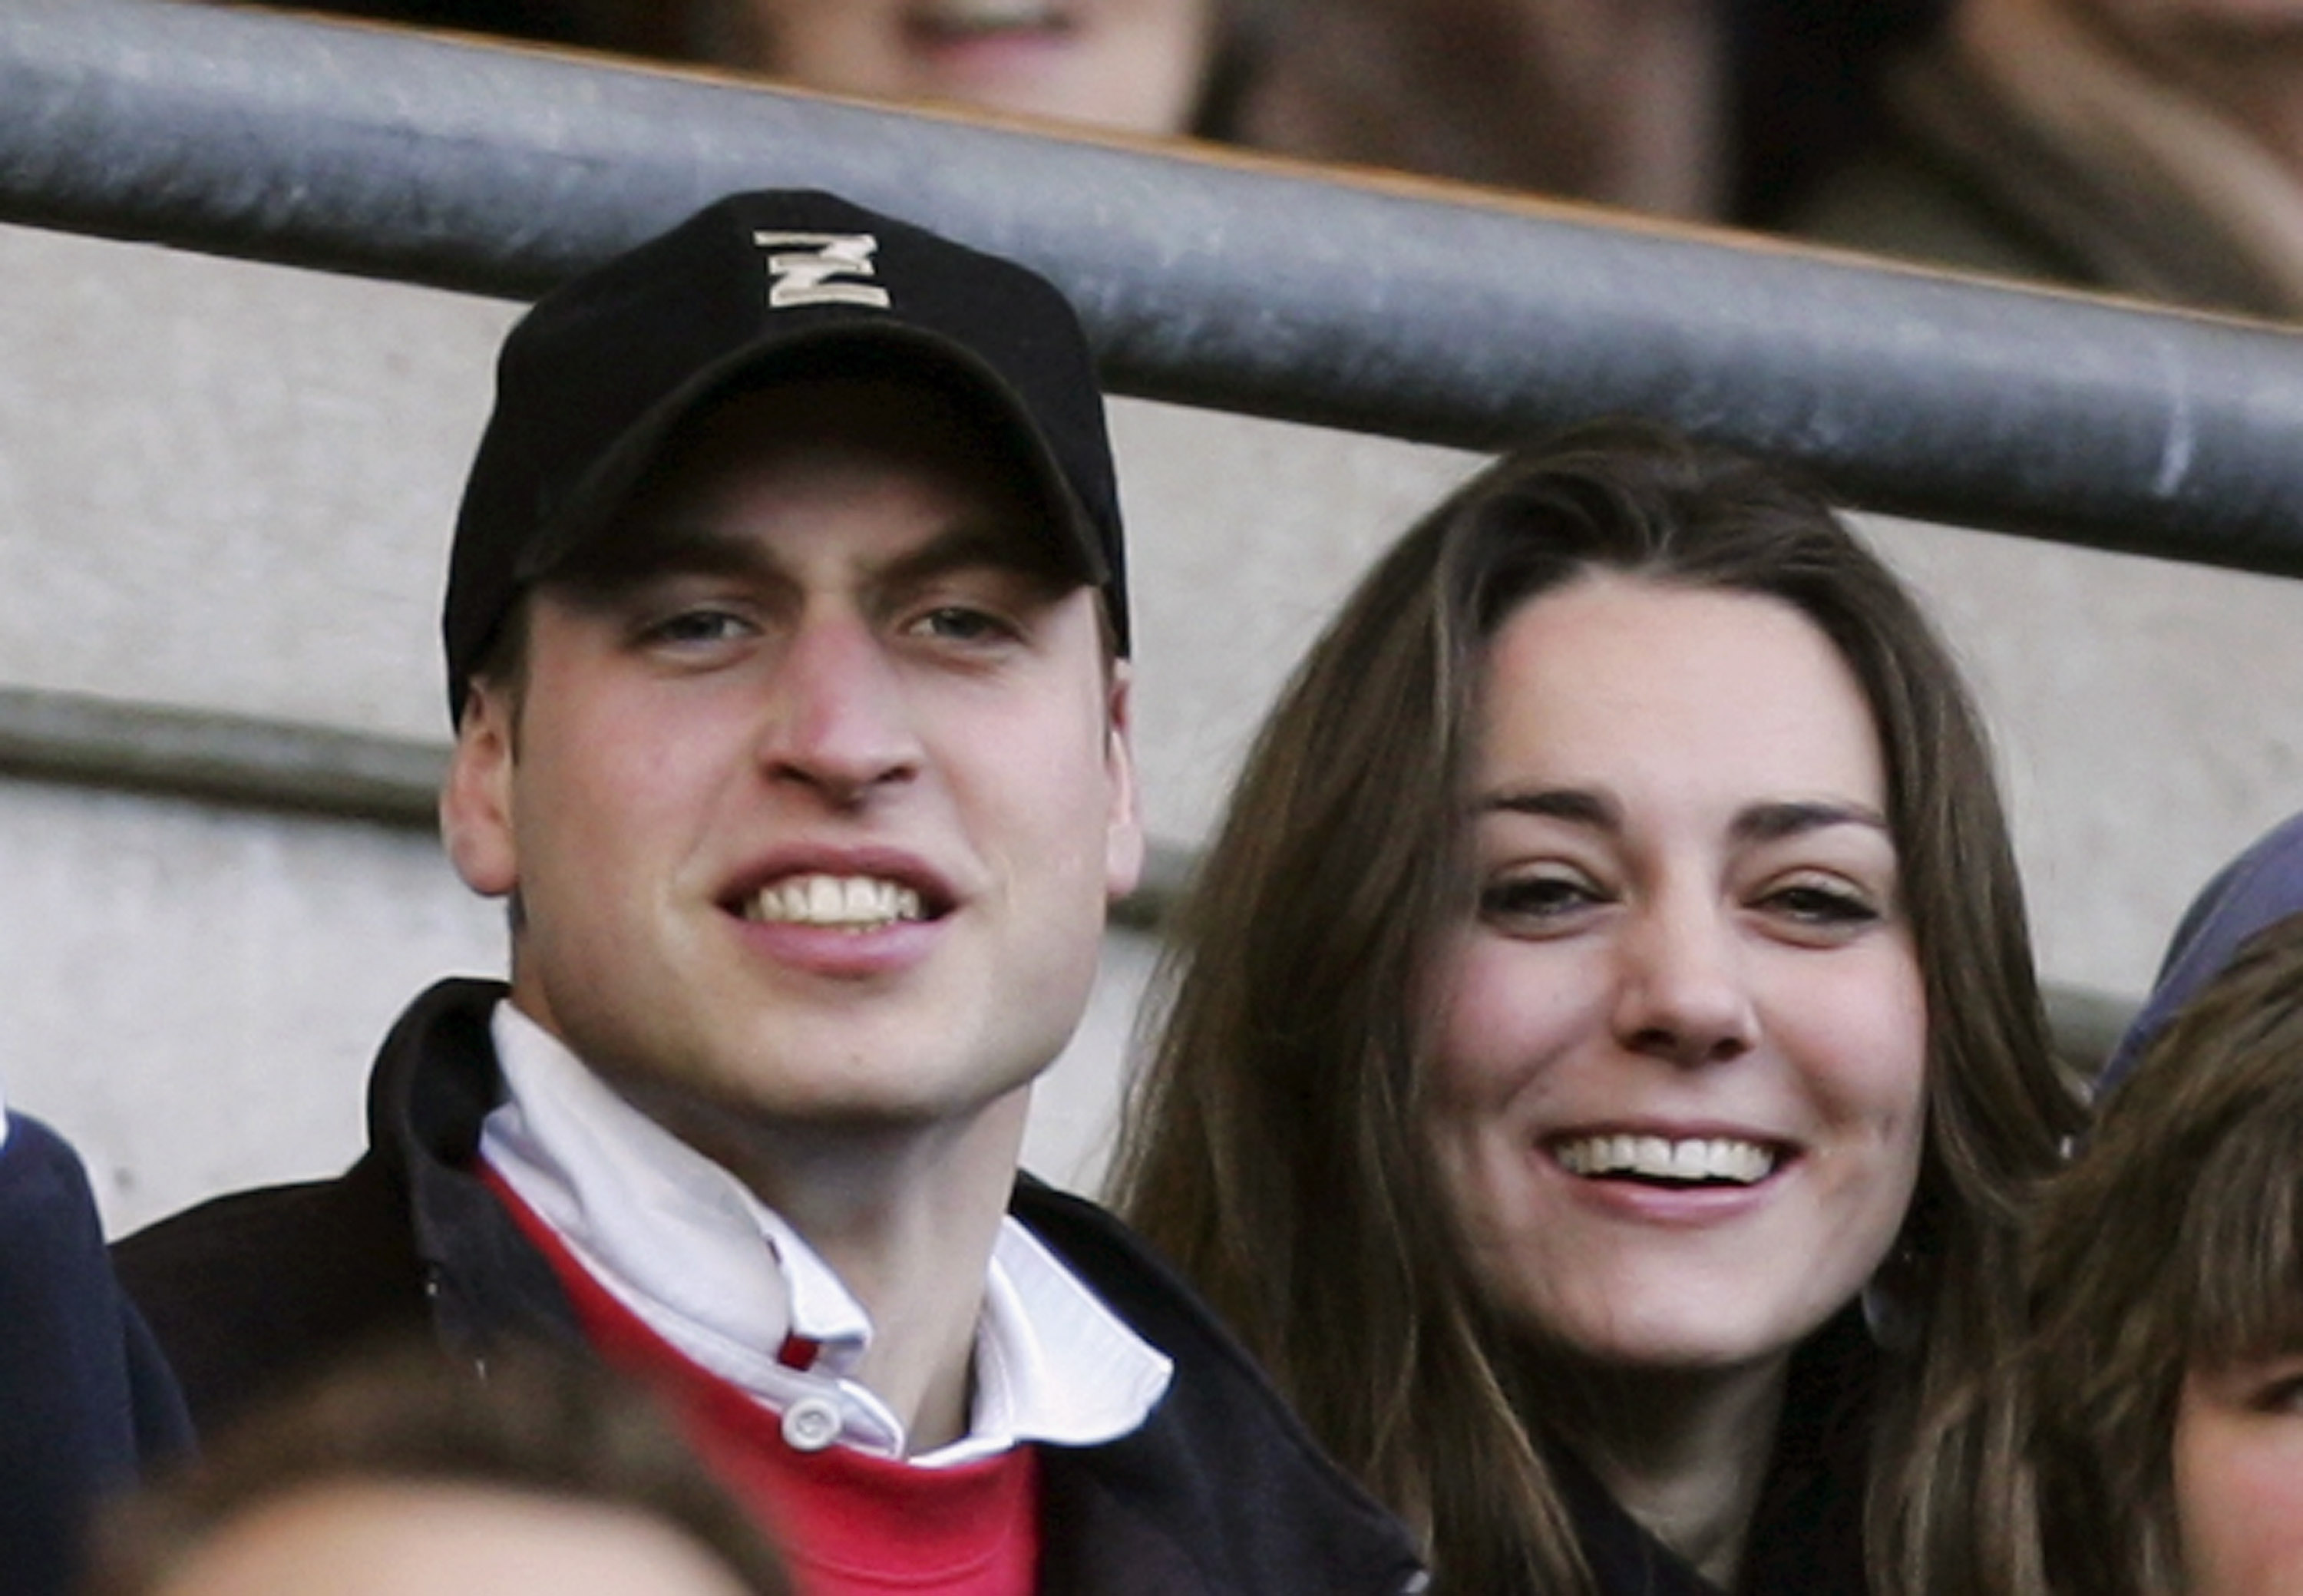 Prince William and Kate Middleton during the RBS Six Nations Championship match between England and Italy at Twickenham on February 10, 2007 in London, England. | Source: Getty Images